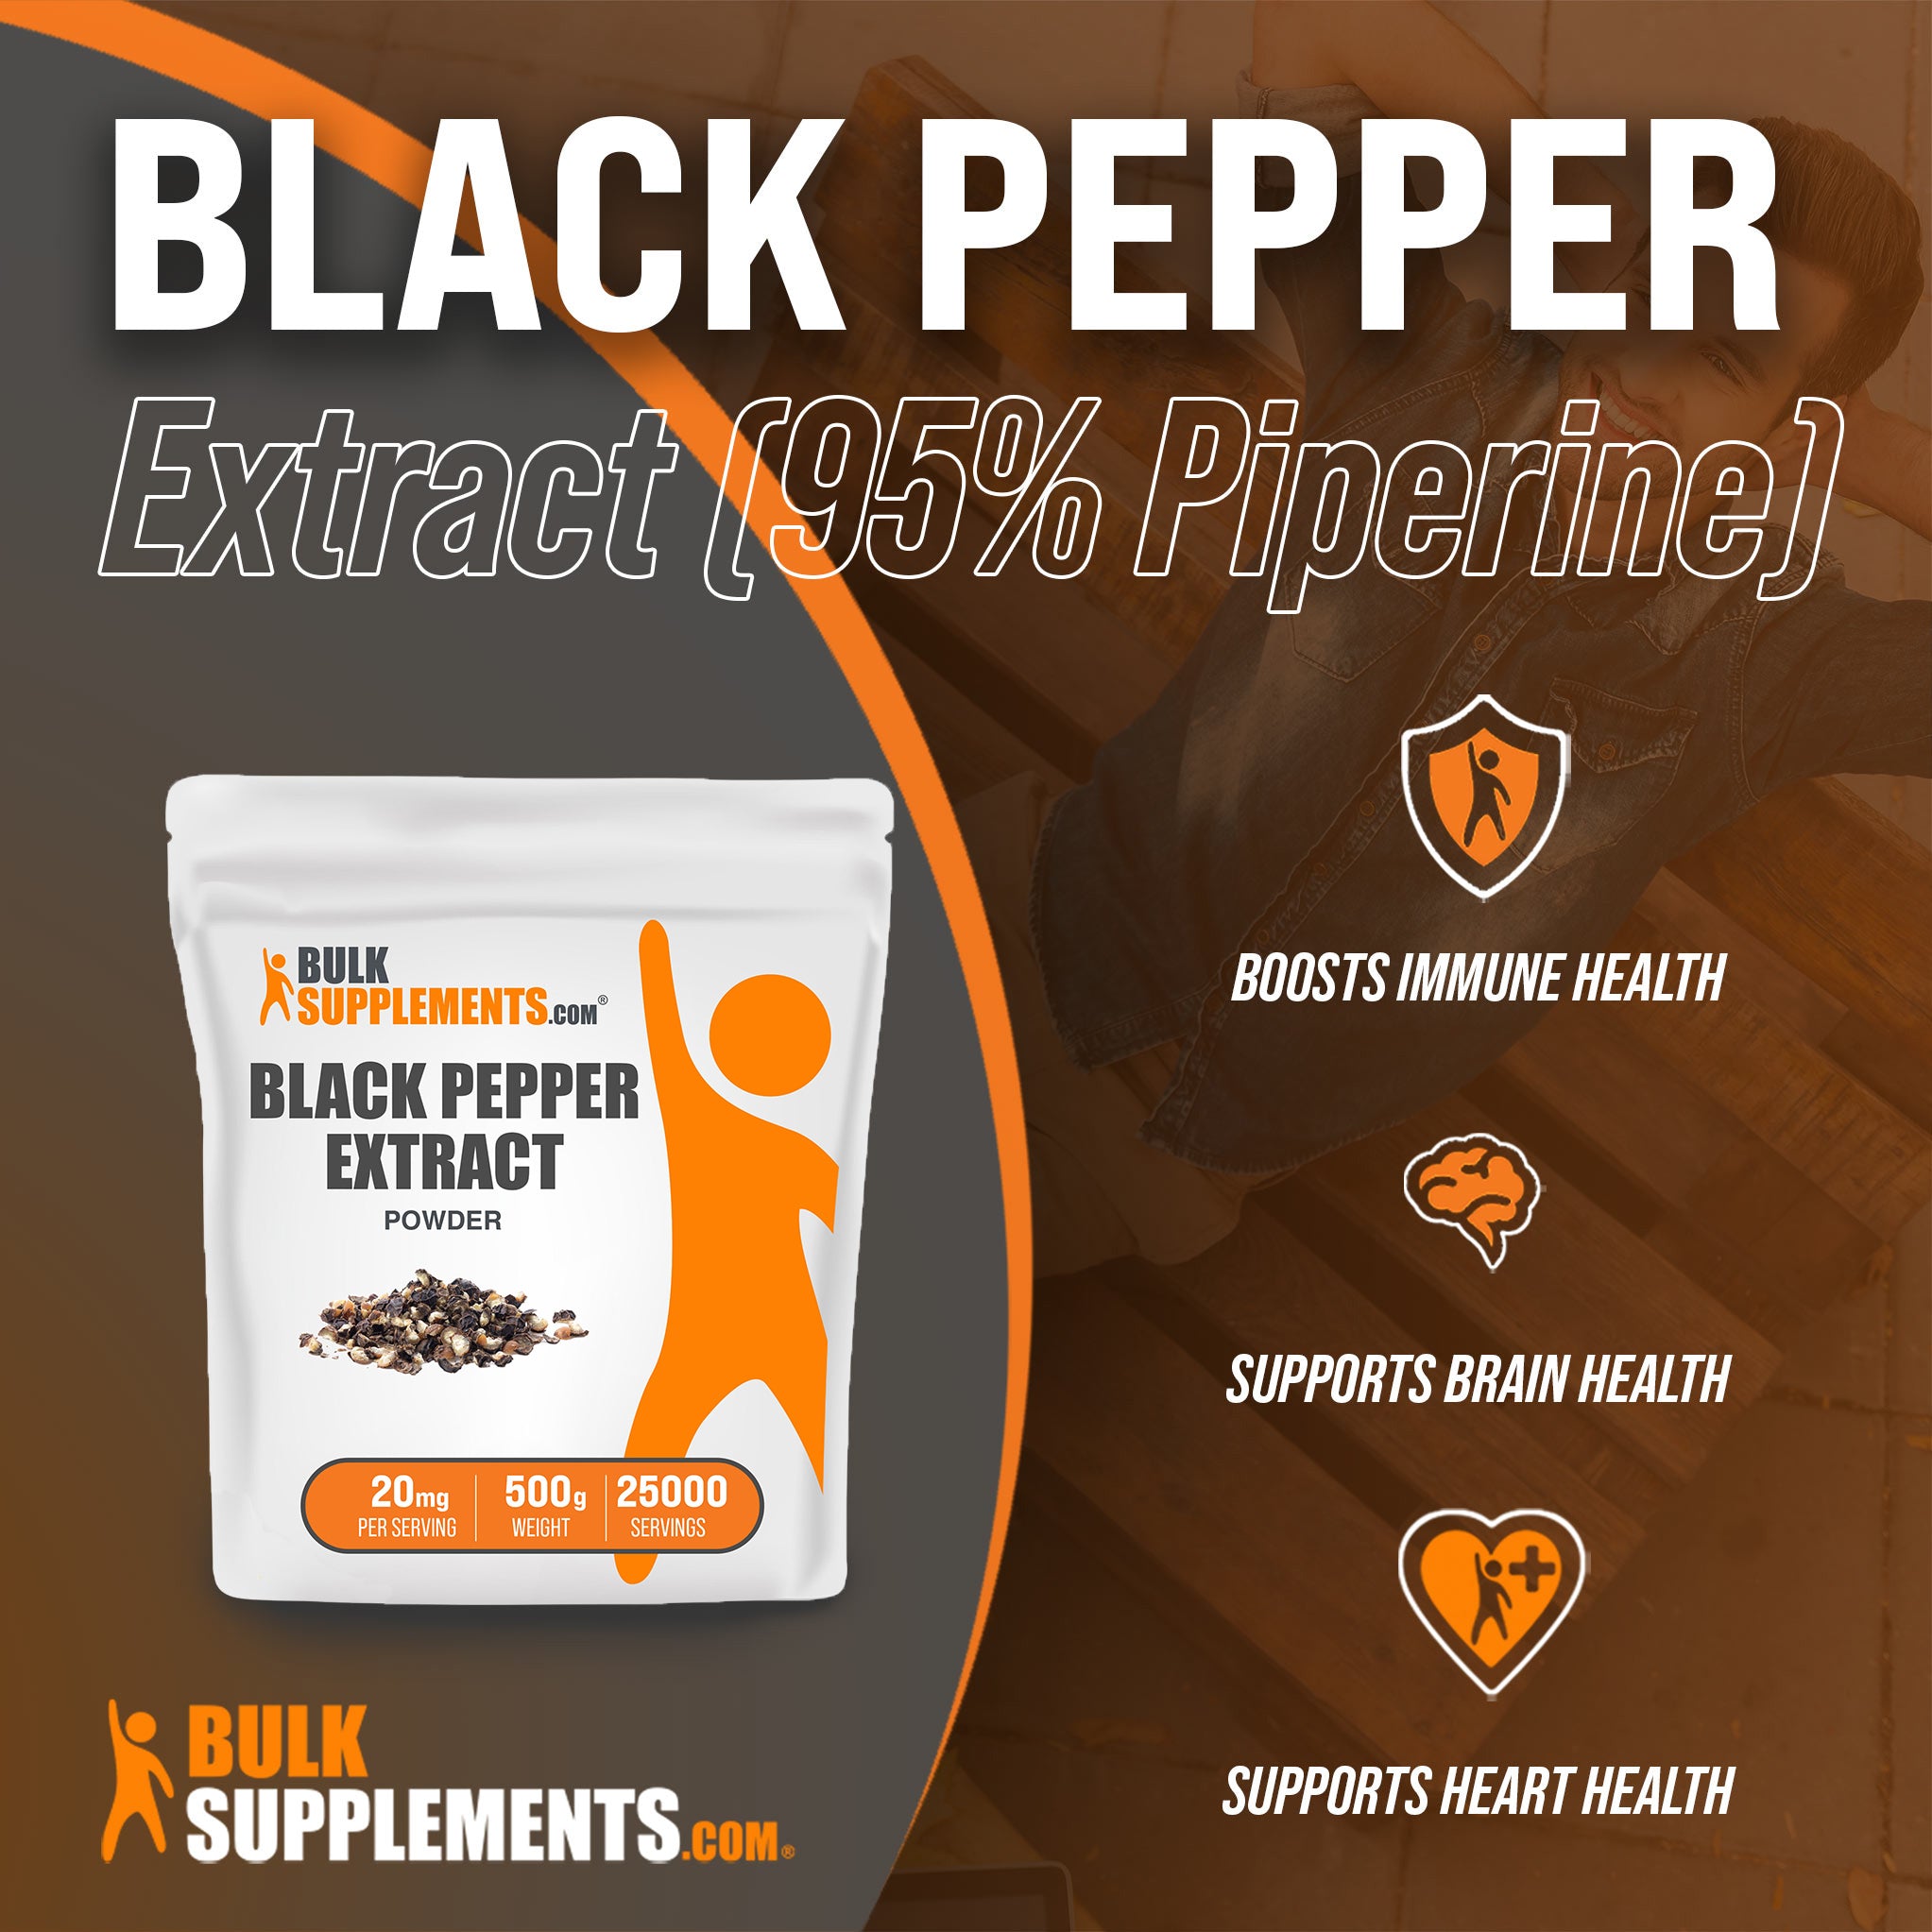 500g bags of black pepper extract are a great source of piperine